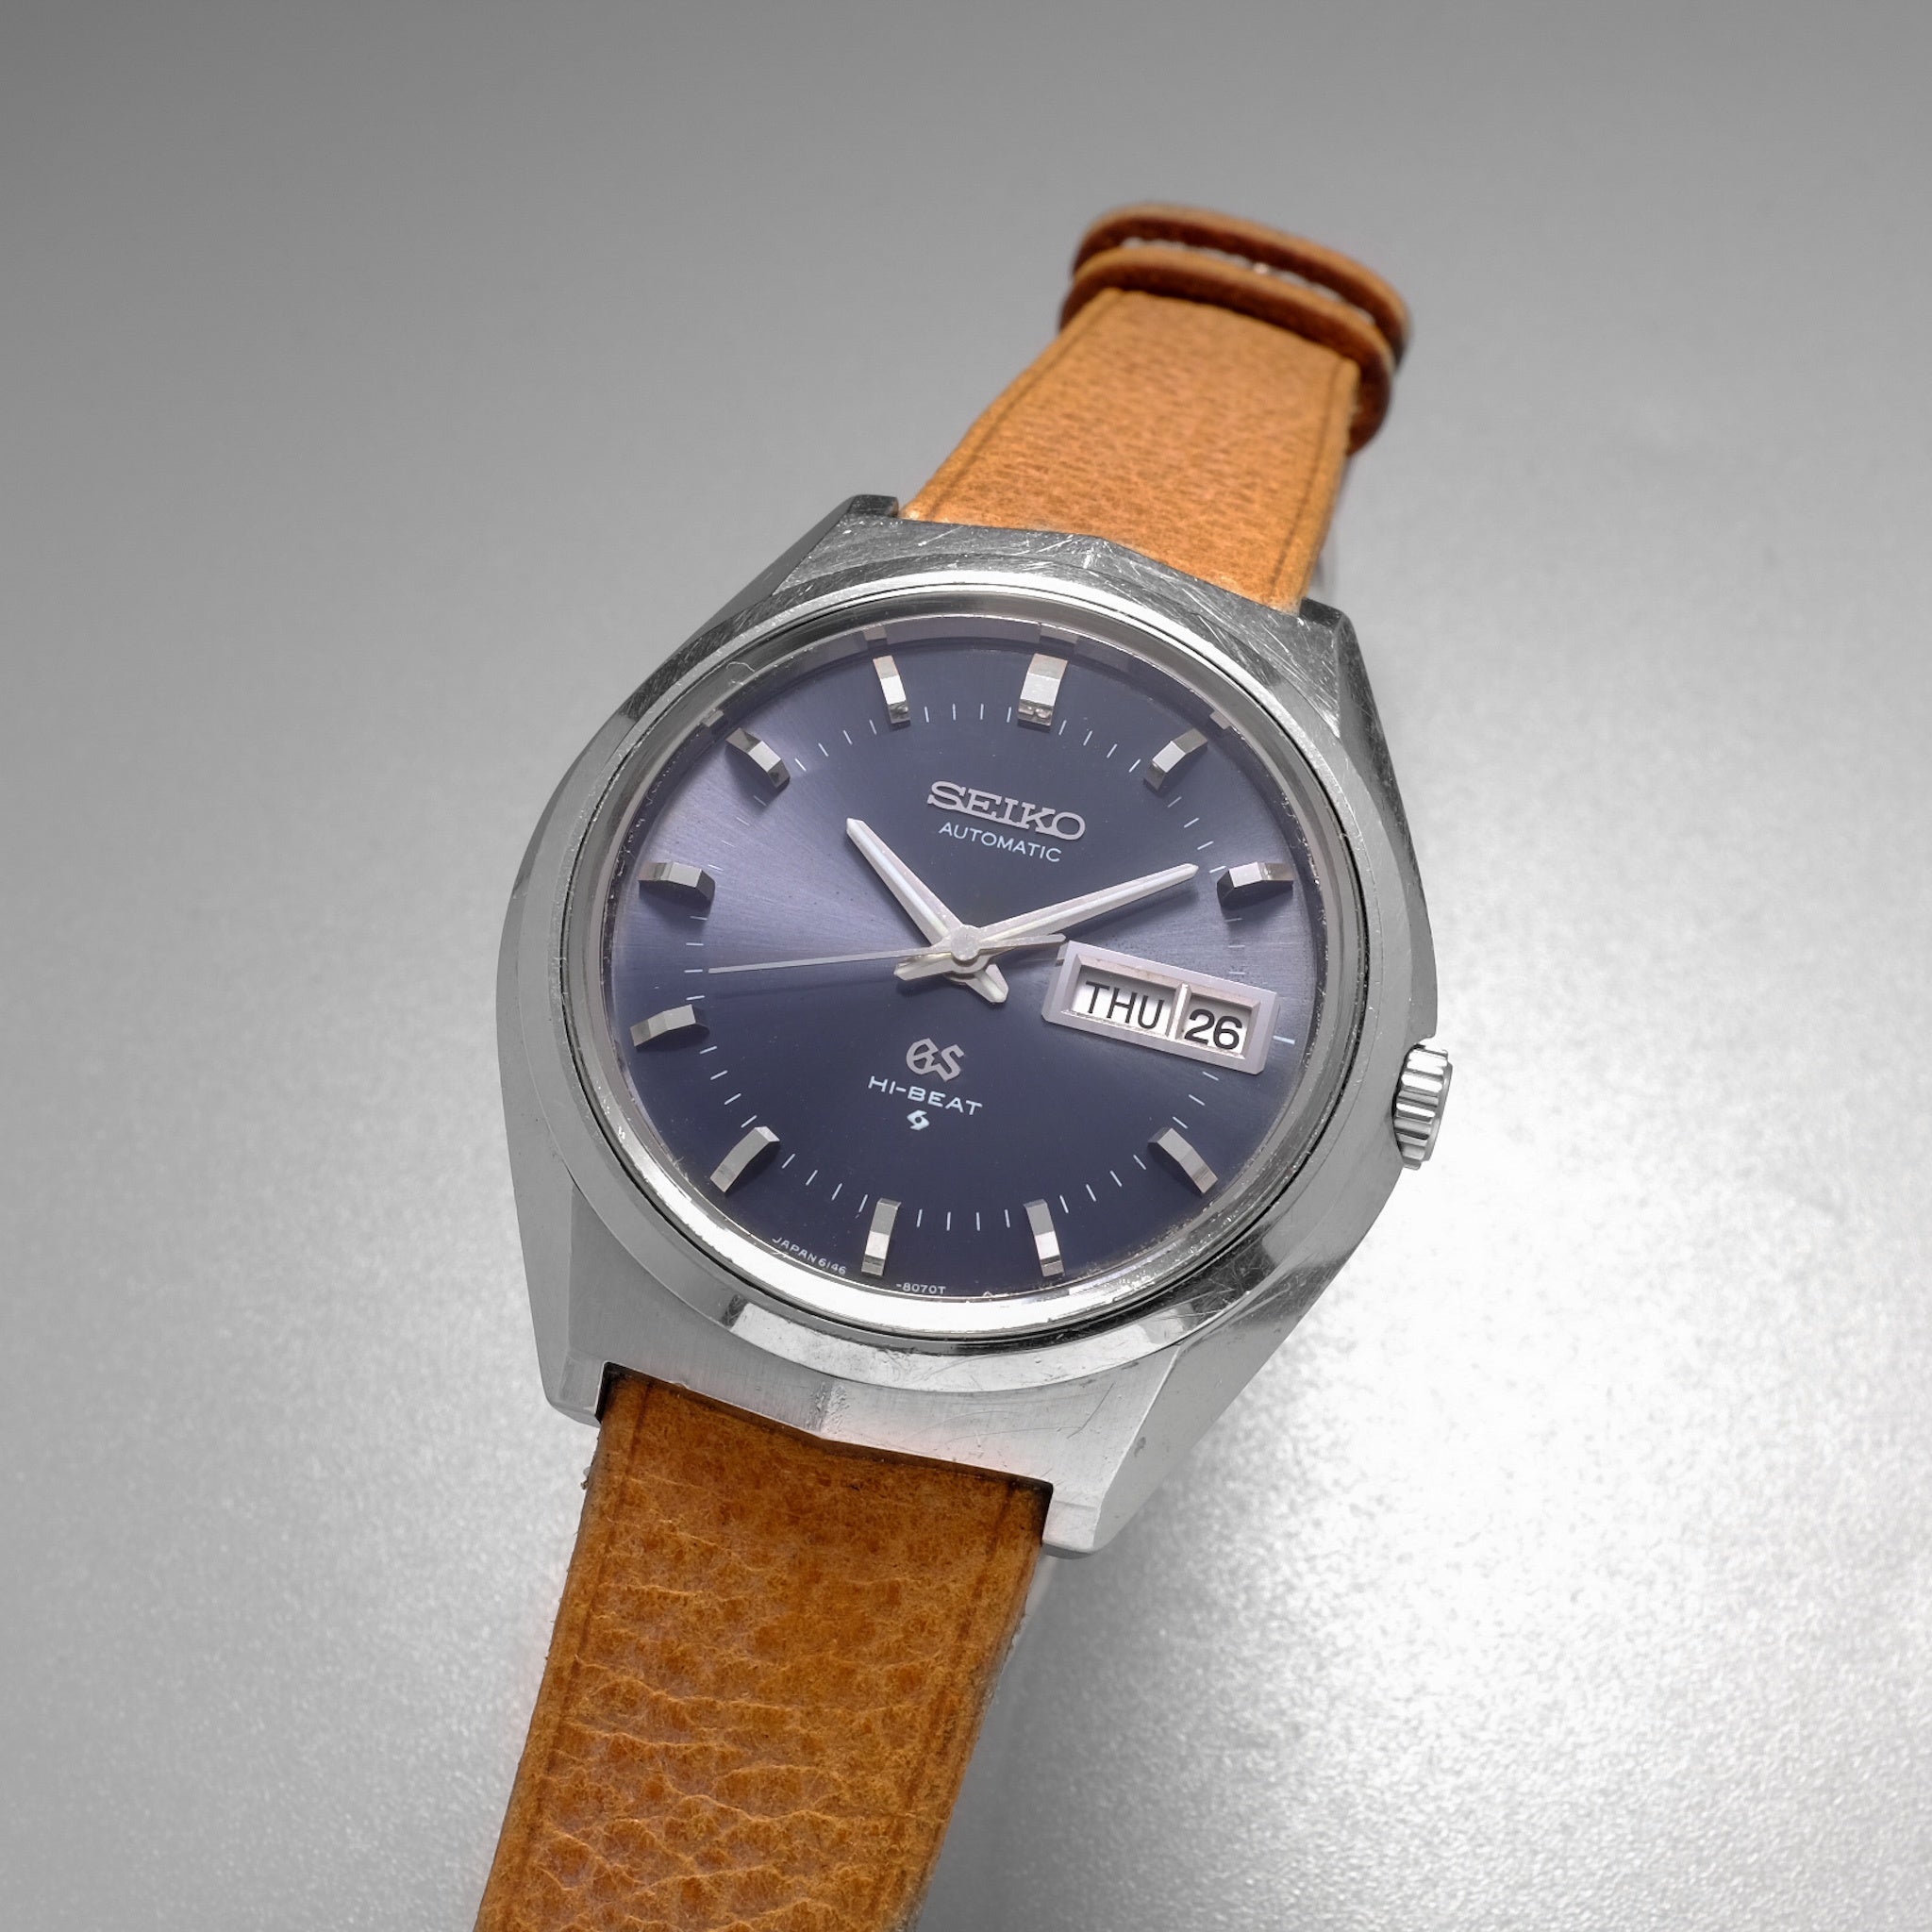 Grand Seiko 6146-8050 from 1972